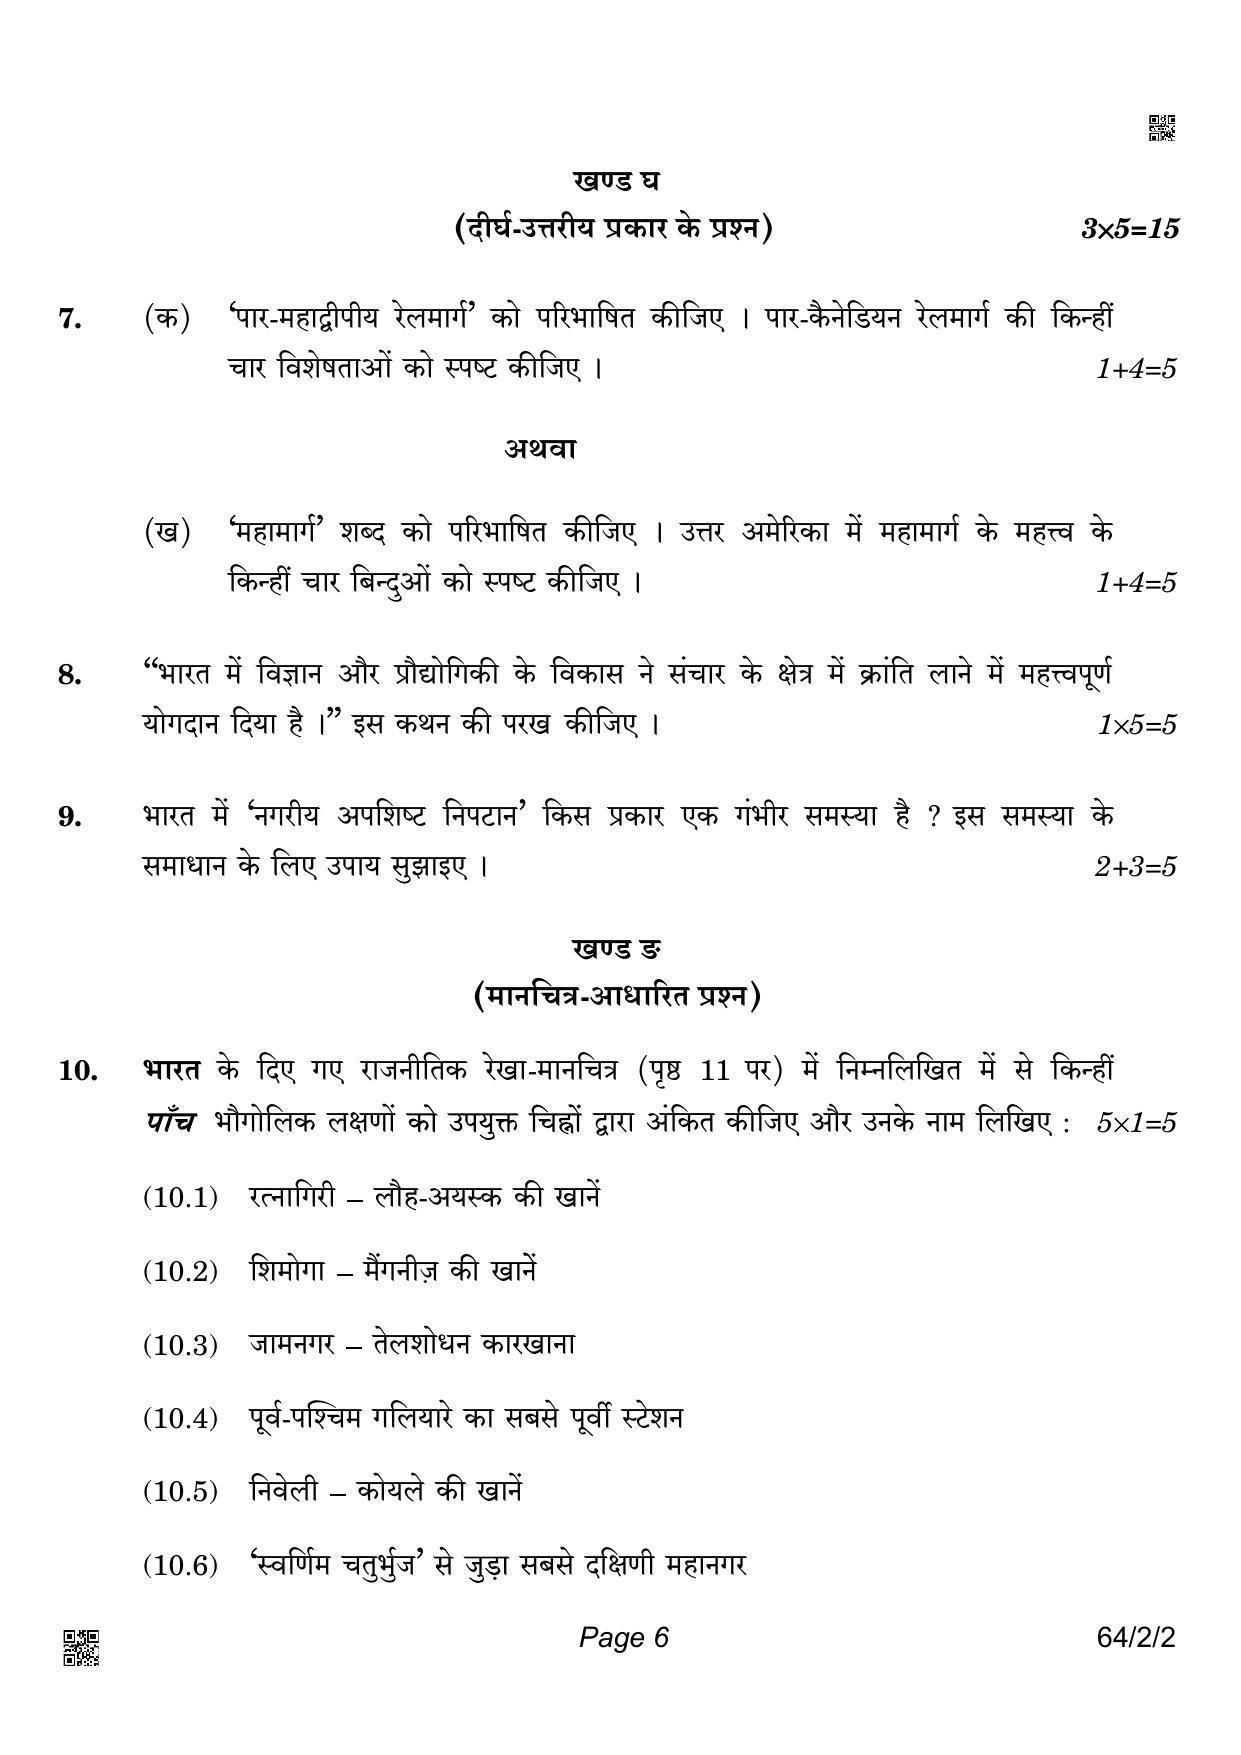 CBSE Class 12 64-2-2 Geography 2022 Question Paper - Page 6